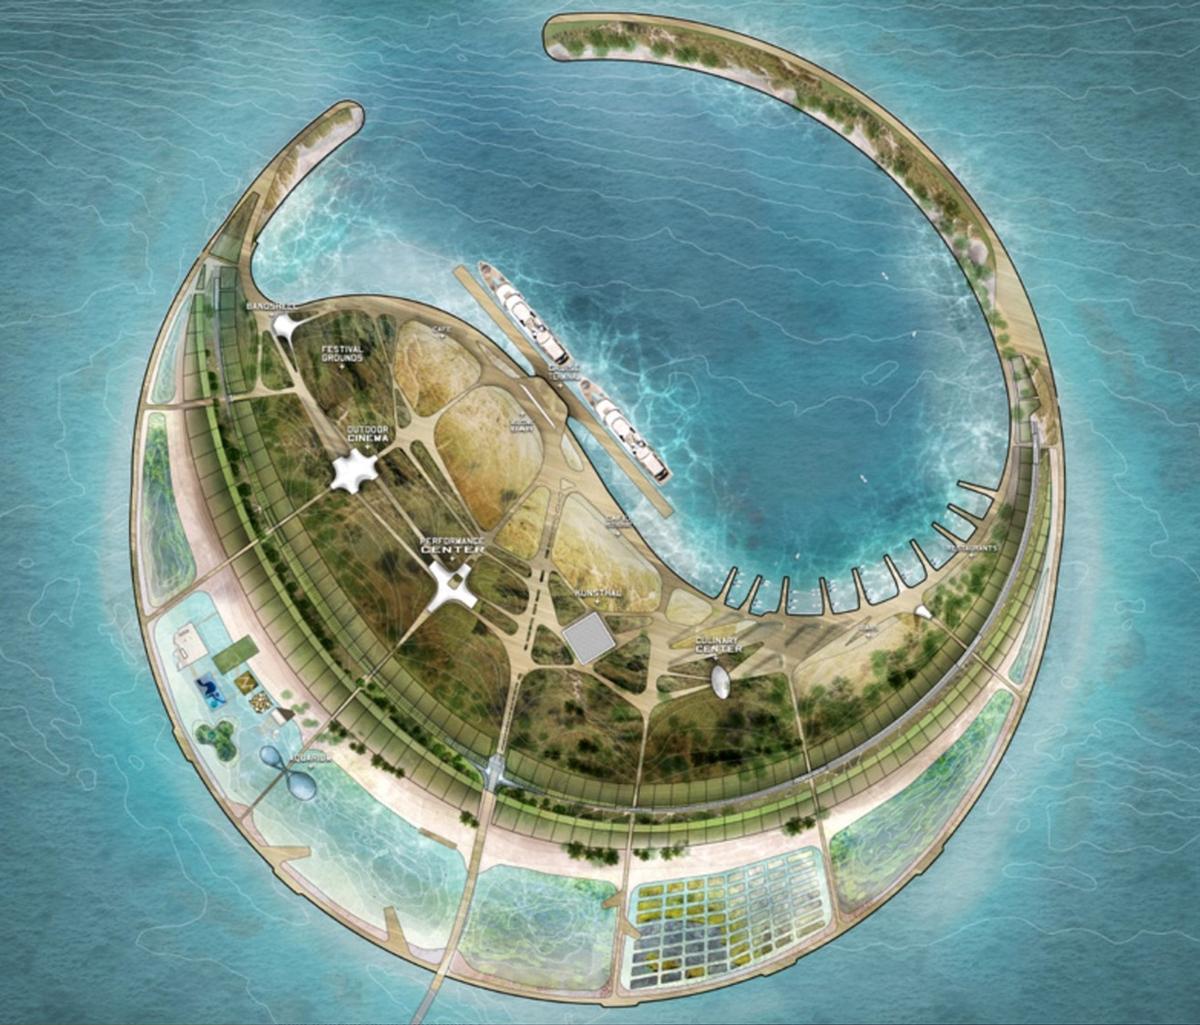 The island will feature hotels, resorts, a theme park, a yacht harbour and a cruise ship port